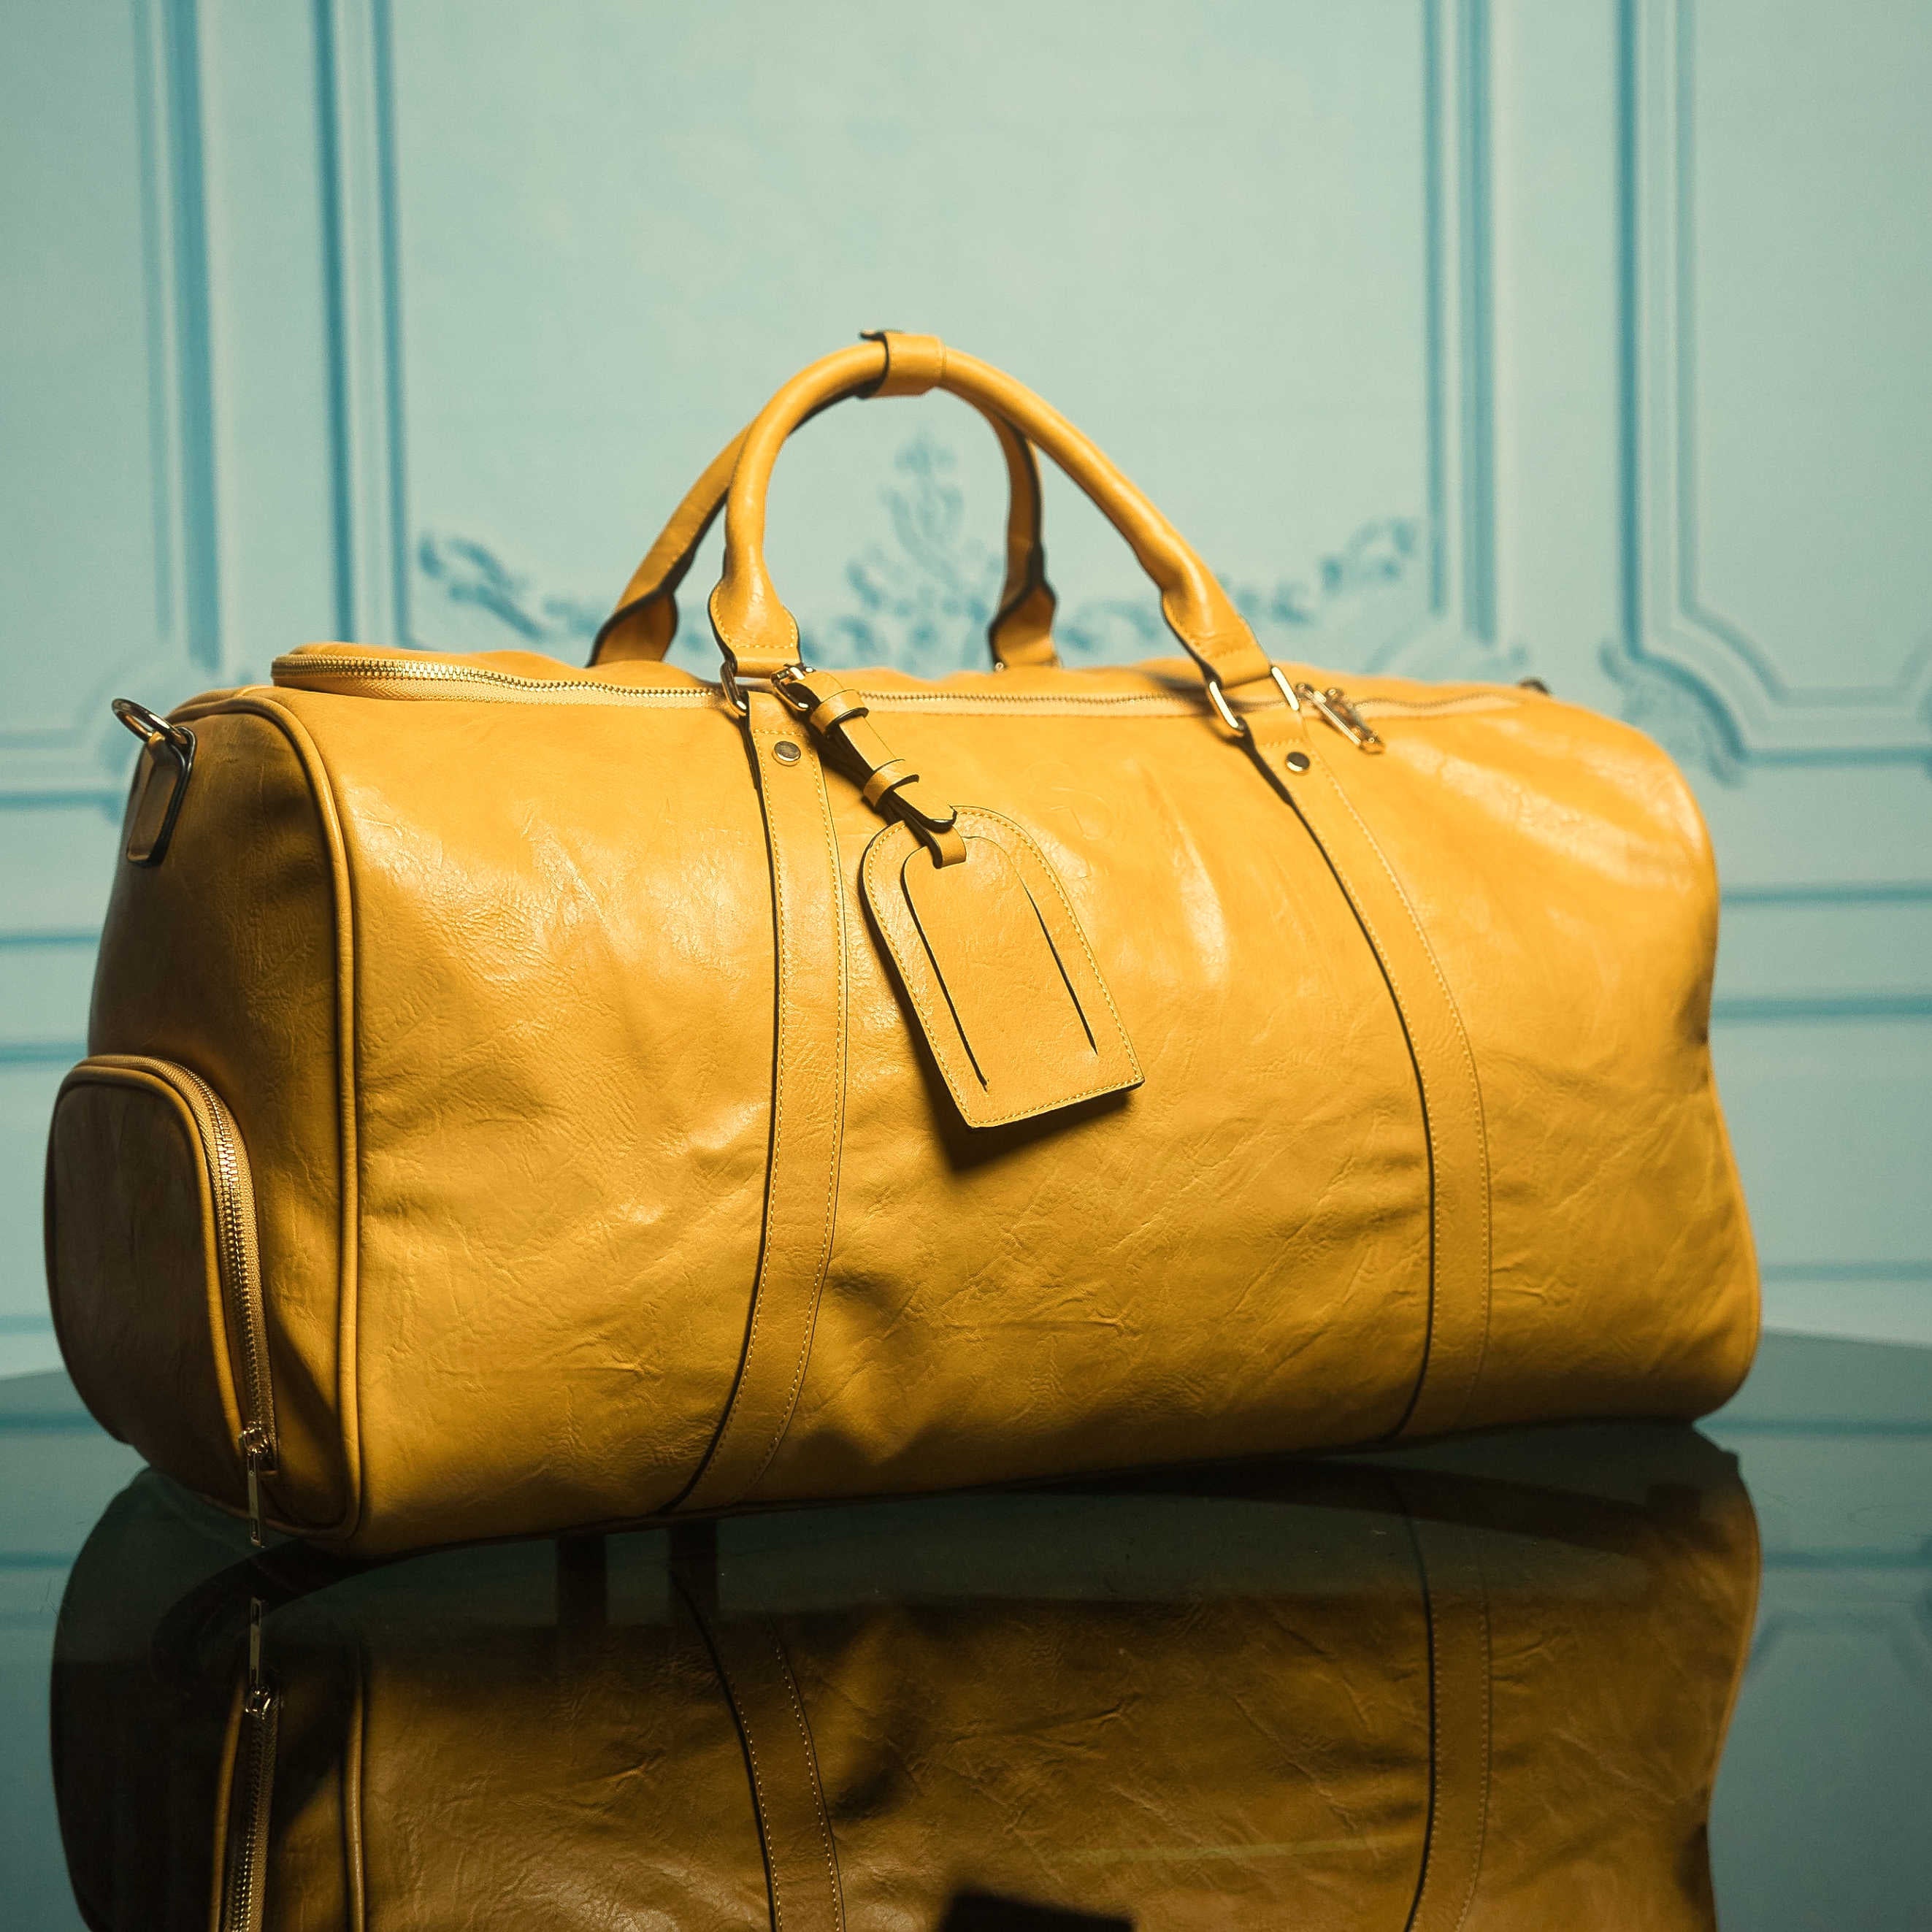 Yellow Luciano Leather Duffle Bag - Sole Premise